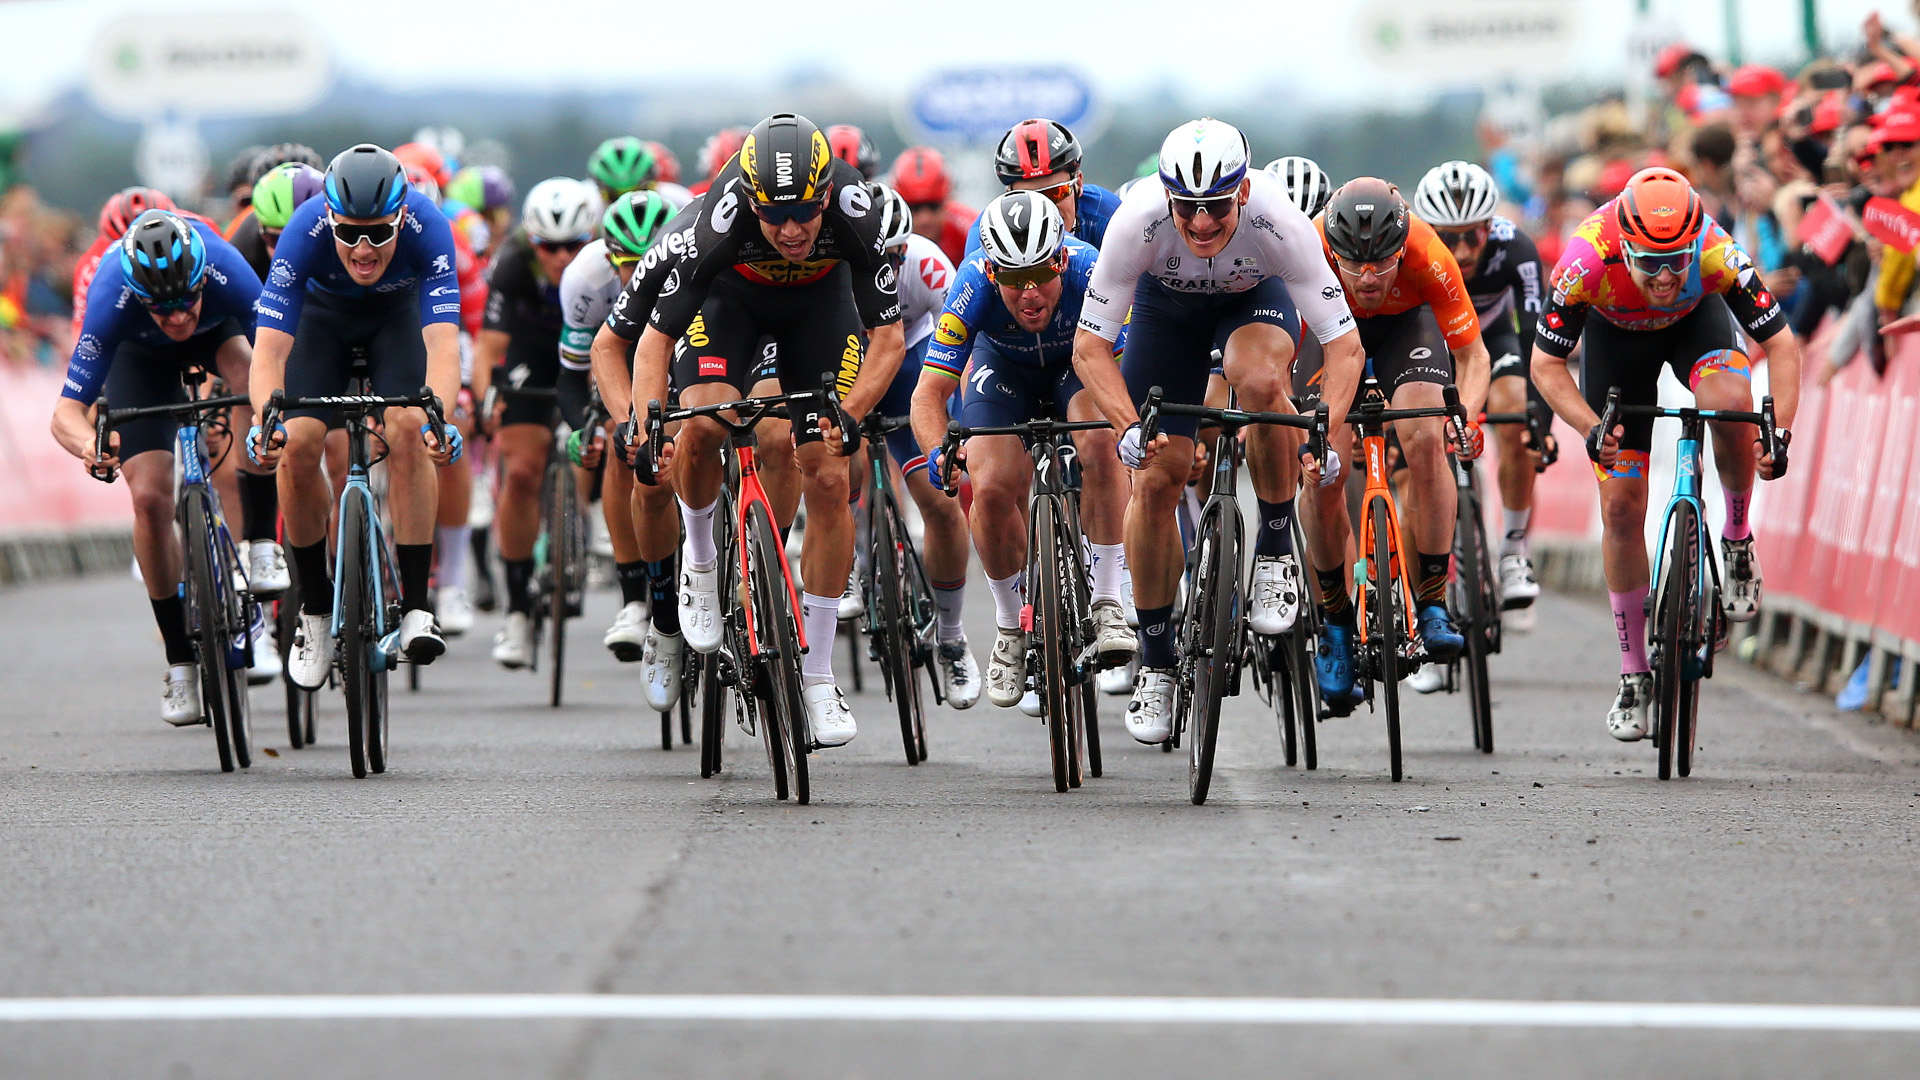 Tour of Britain live stream how to watch all cycling stages online